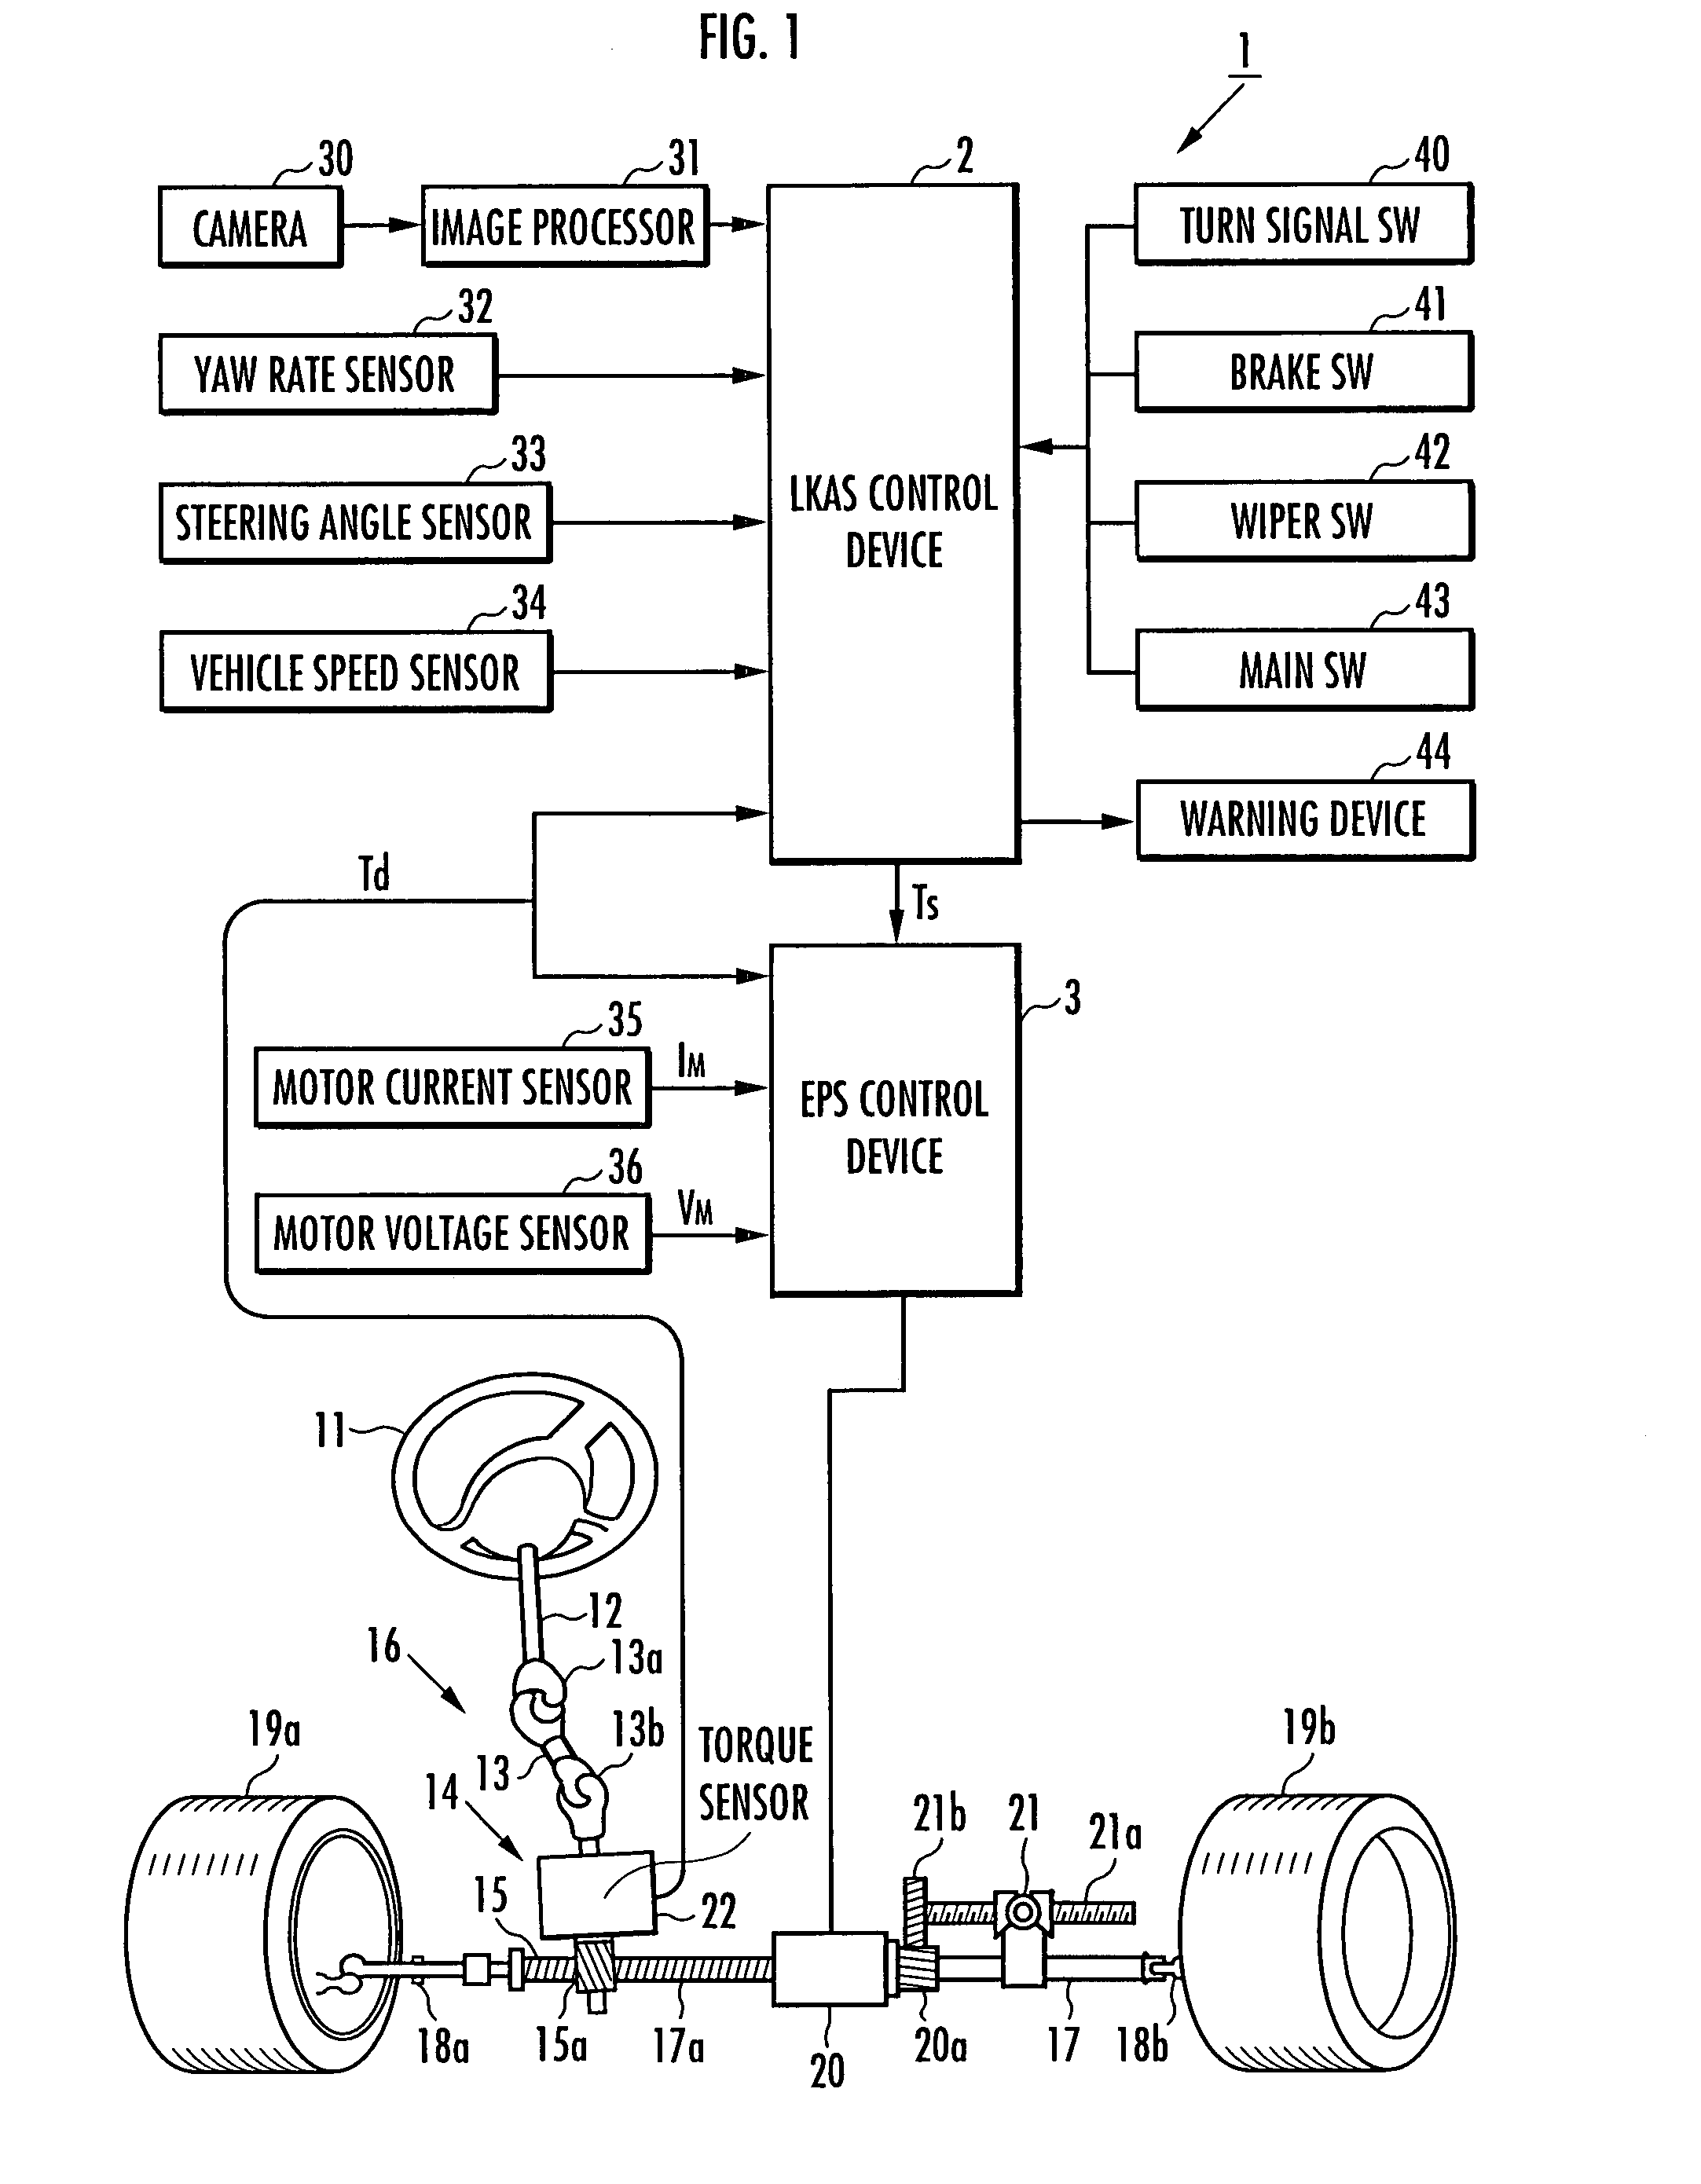 Steering control device for vehicles